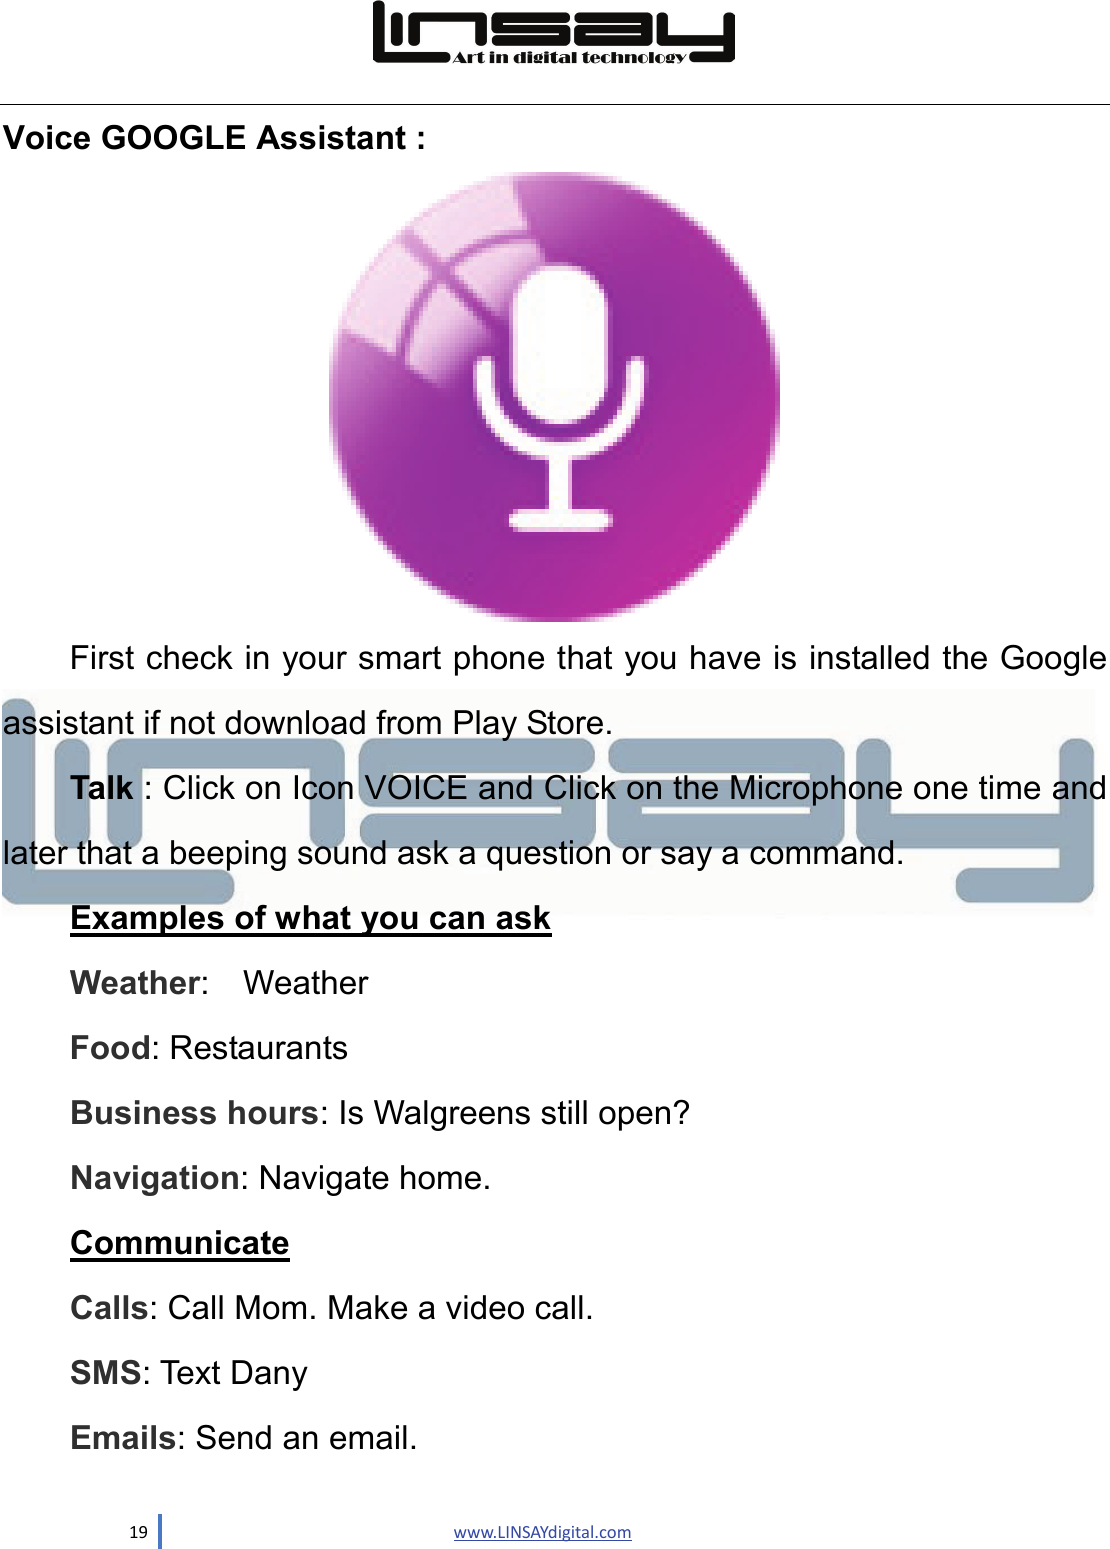  19                               www.LINSAYdigital.com  Voice GOOGLE Assistant :  First check in your smart phone that you have is installed the Google assistant if not download from Play Store. Talk : Click on Icon VOICE and Click on the Microphone one time and later that a beeping sound ask a question or say a command. Examples of what you can ask Weather:  Weather Food: Restaurants   Business hours: Is Walgreens still open? Navigation: Navigate home. Communicate Calls: Call Mom. Make a video call. SMS: Text Dany Emails: Send an email. 